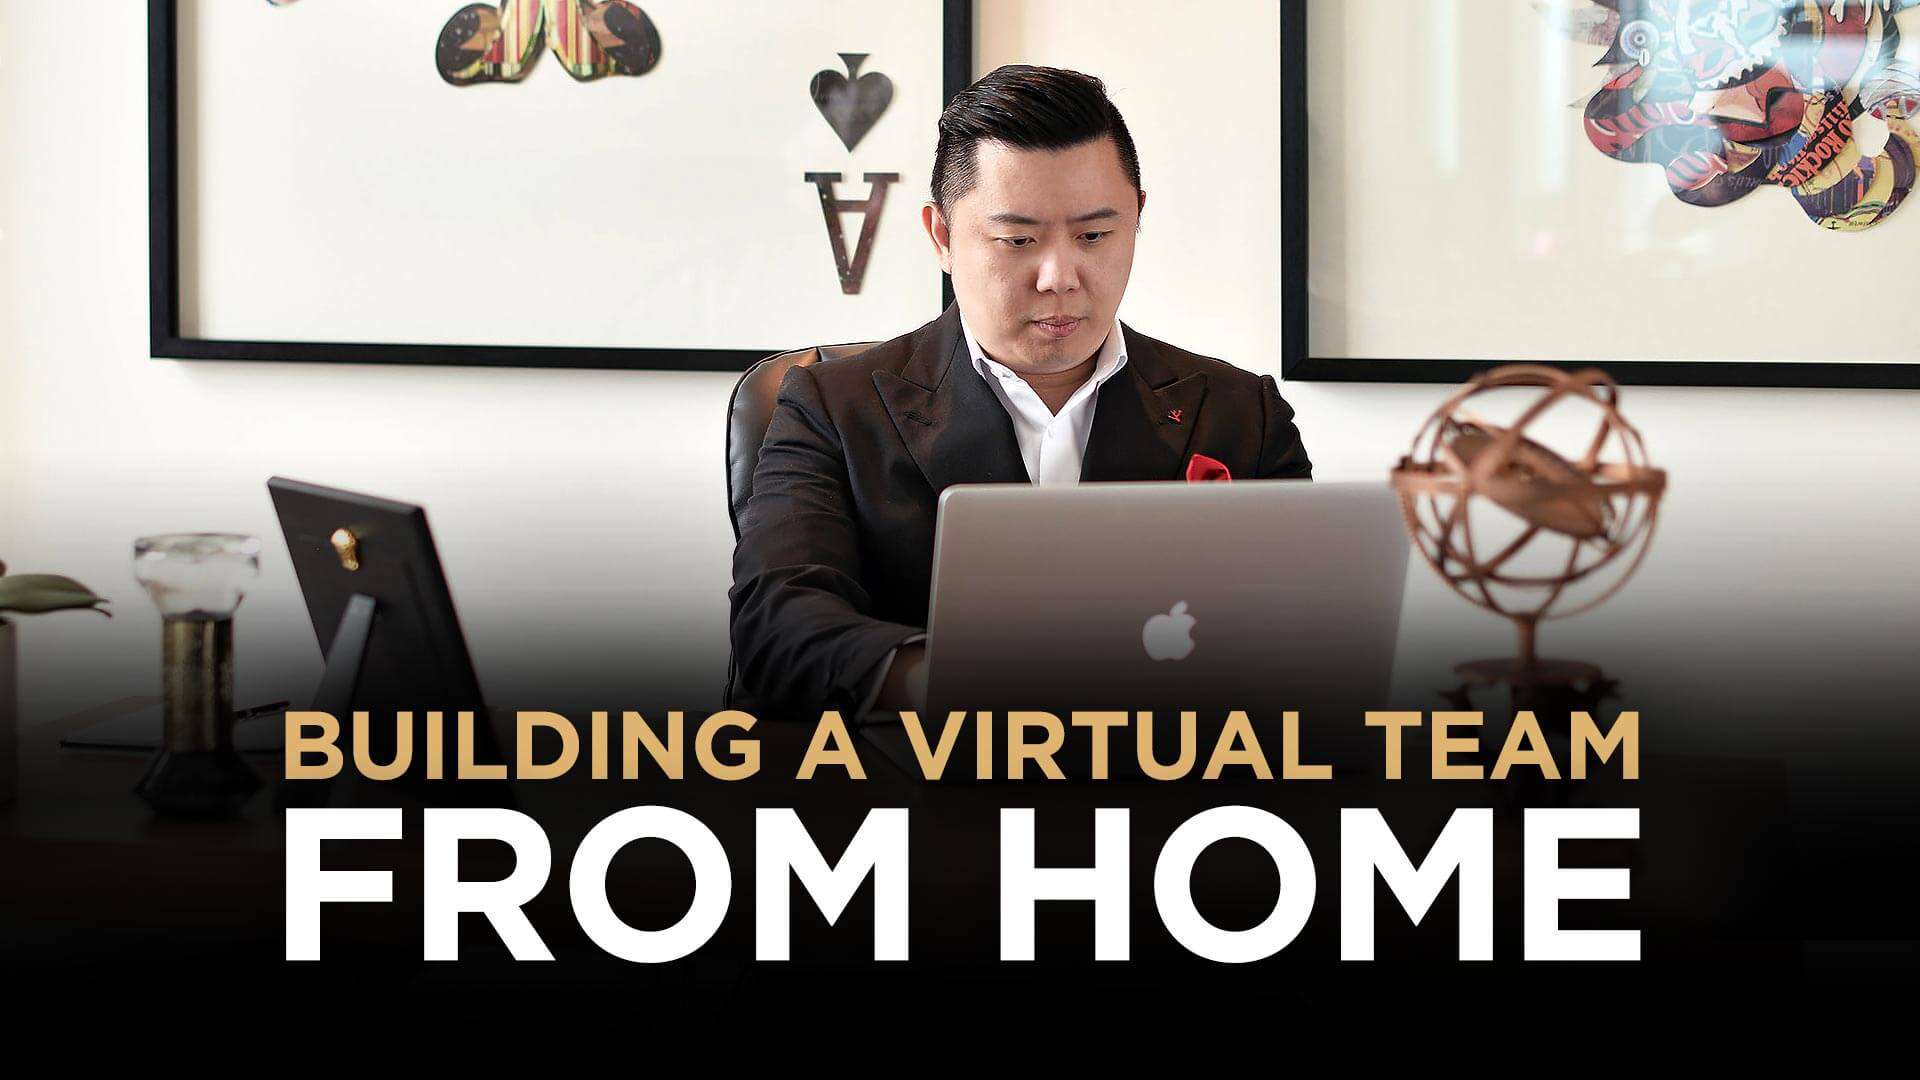 Building a Virtual Team From Home